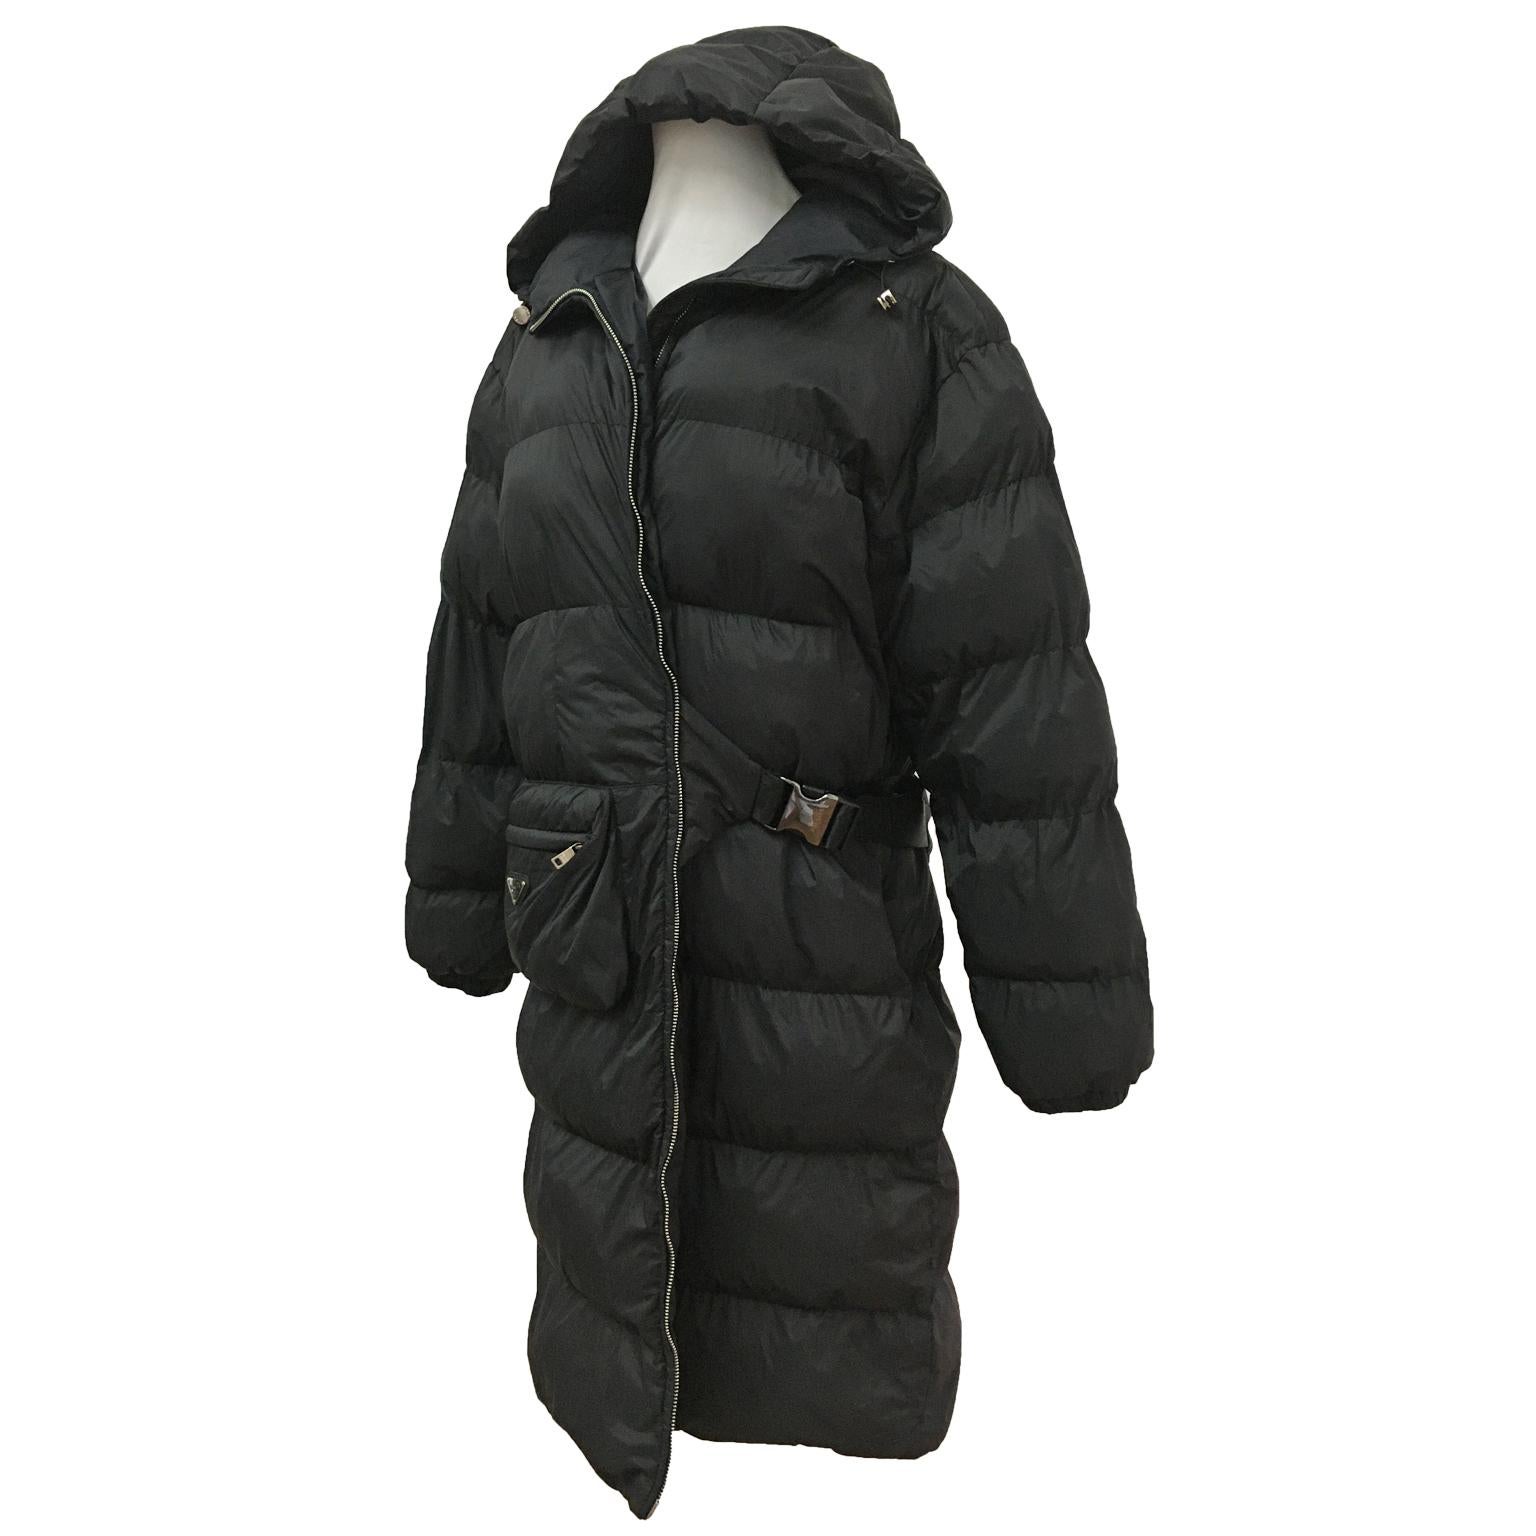 Prada black nylon goose down padding coat with hood. Features an original pouch pocket on the front. 
It has kimono-like closure, with side-release buckle, and the metal triangle logo. 
Made in Italy 

Size : M

Measurements ; 
Length from neck